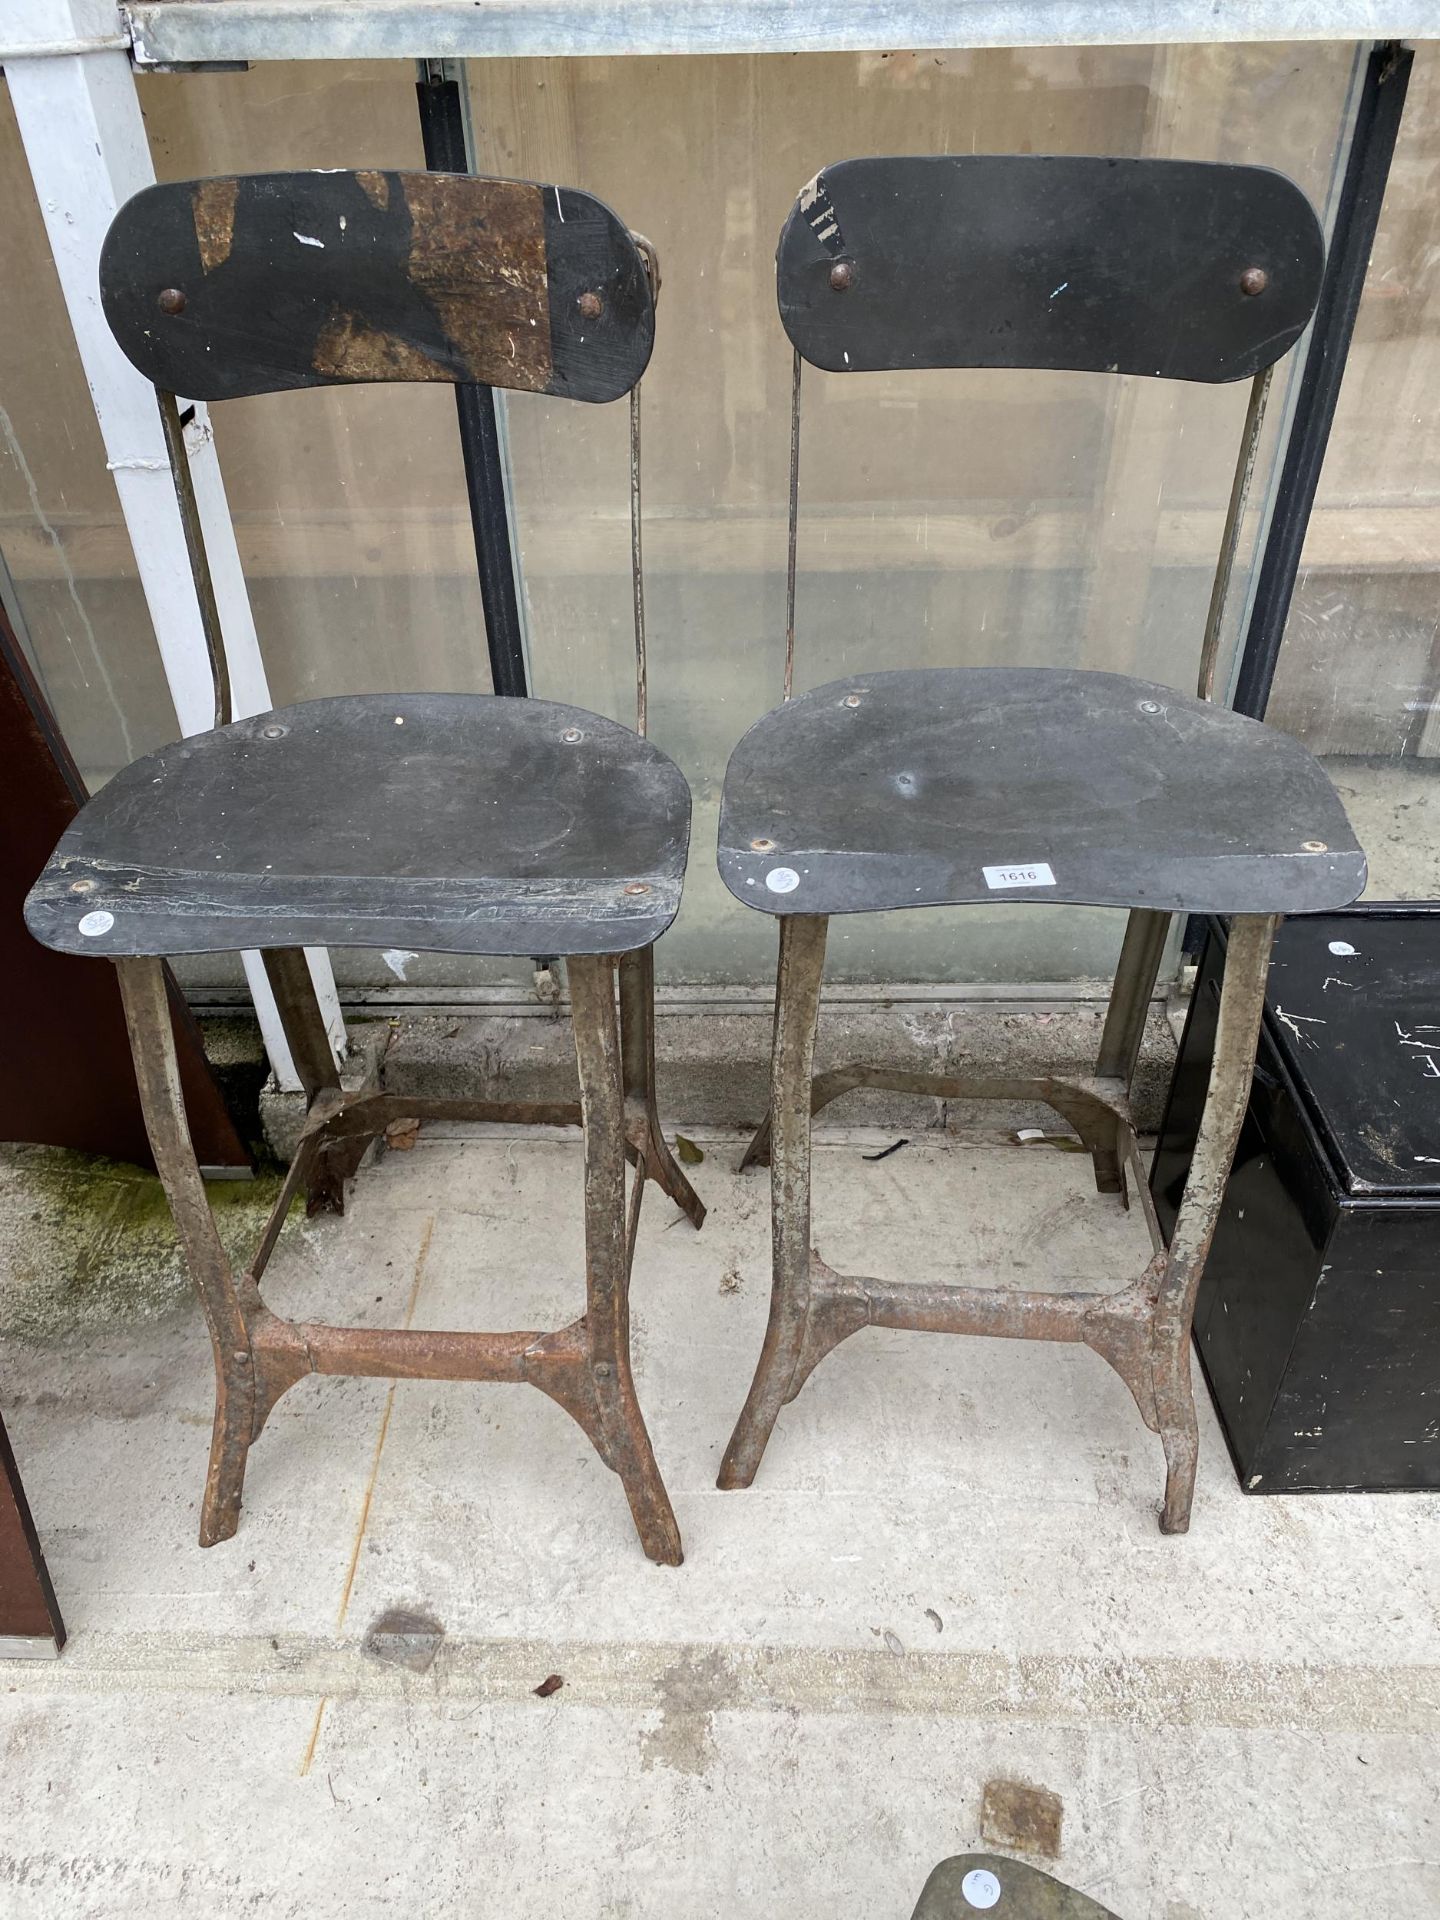 A PAIR OF INDUSTRIAL MACHINISTS CHAIRS